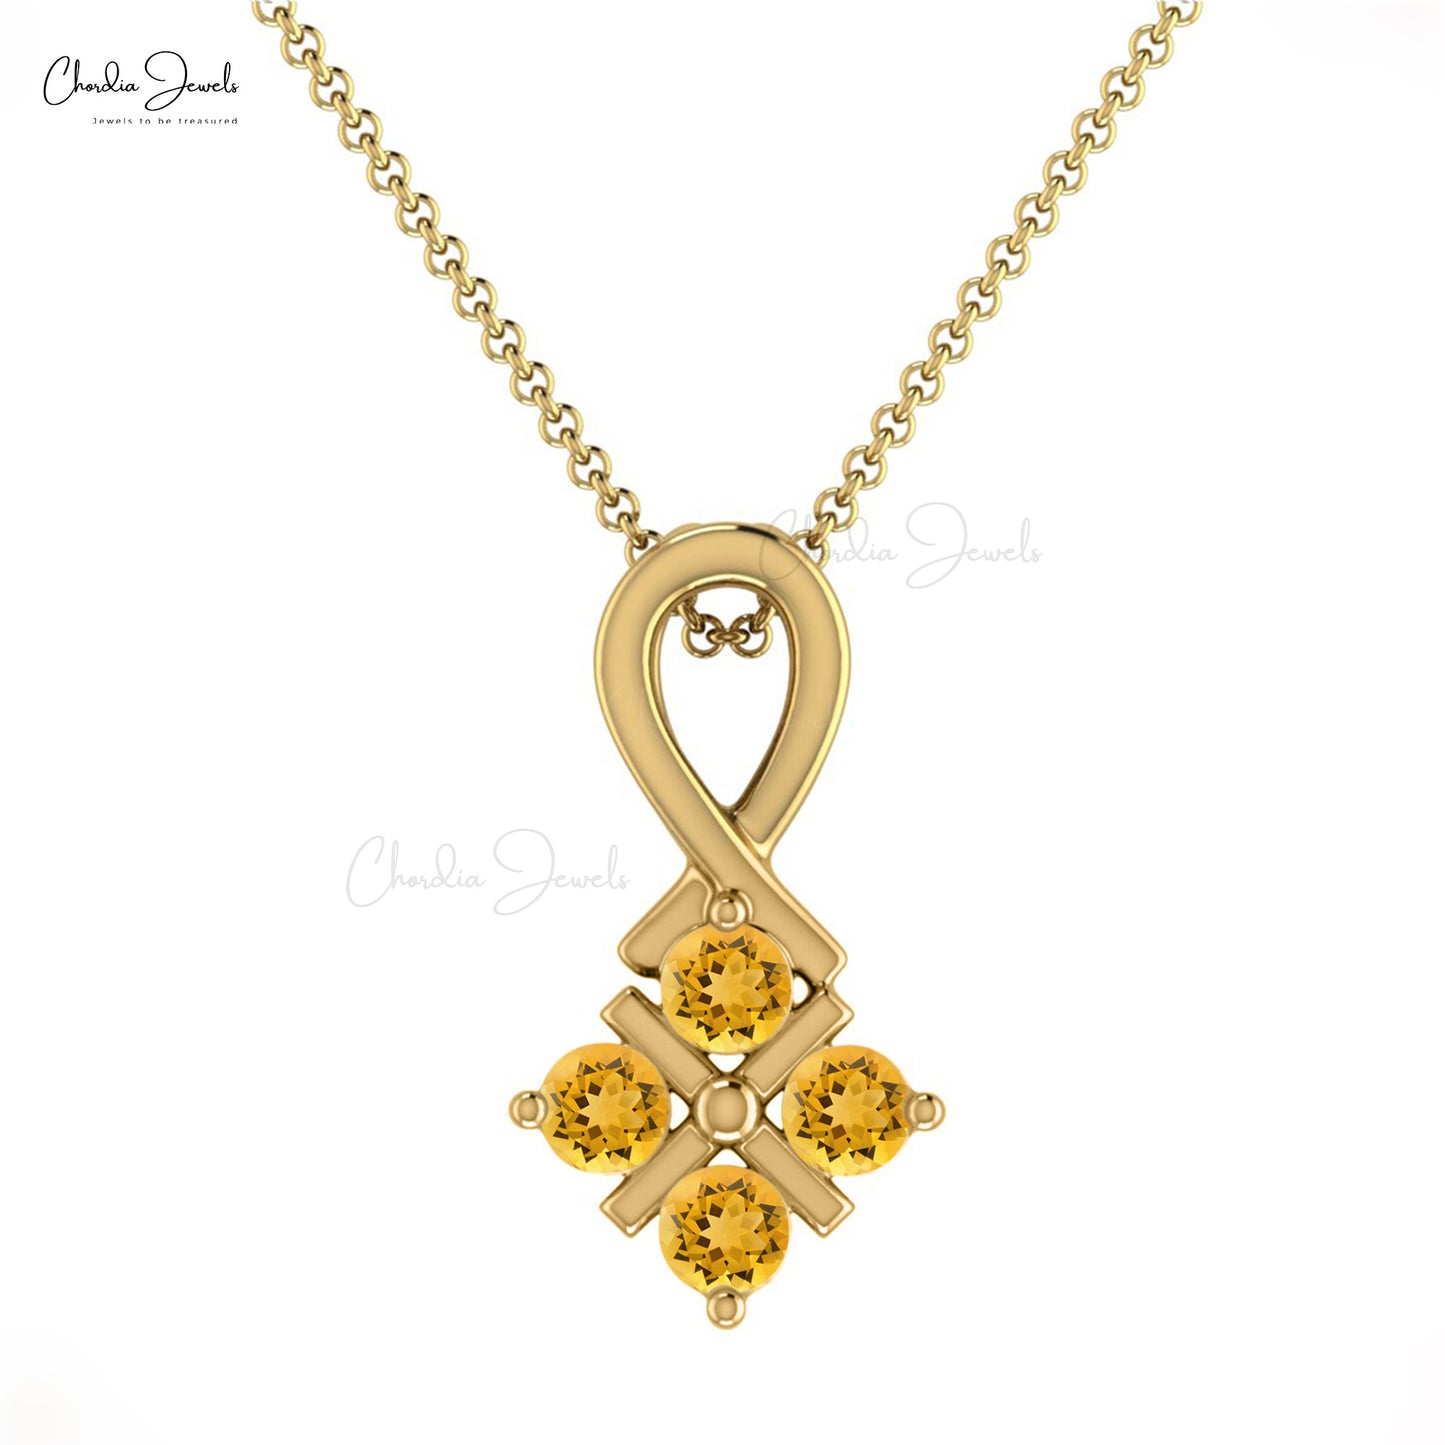 Luxury Fine Jewelry Round Shape Yellow Citrine Gemstone Twisted Pendant Necklace 14k Real Gold Light Weight Jewelry For Mother's Day Gift